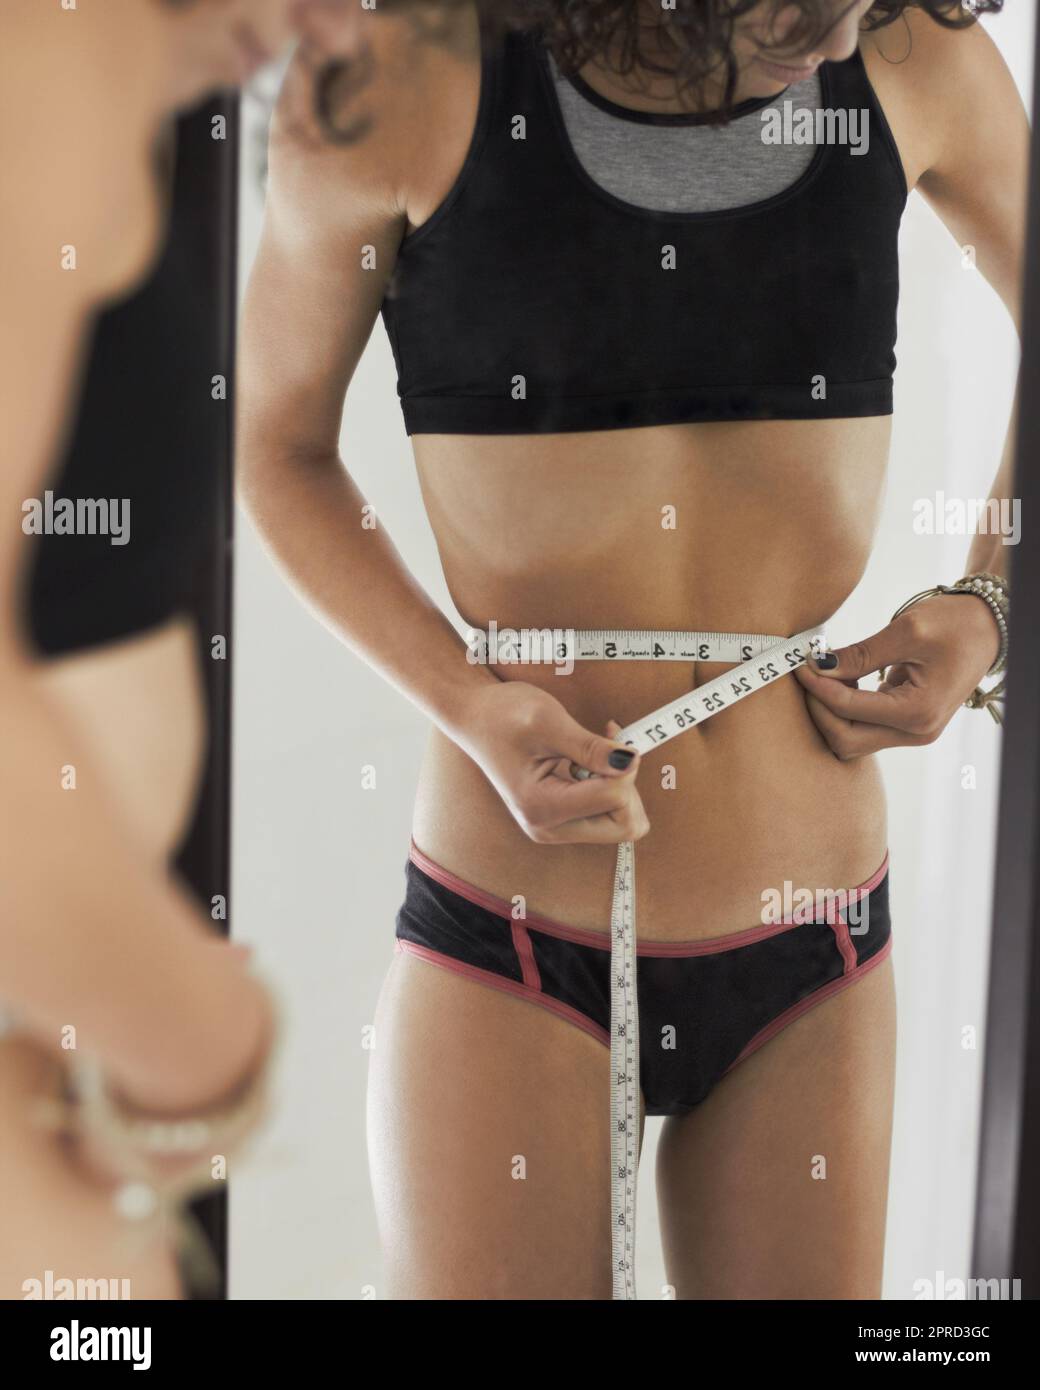 Anorexia, measuring tape and stomach of woman in mirror for weight loss, eating disorder and body image. Depression, mental health and sad with female Stock Photo